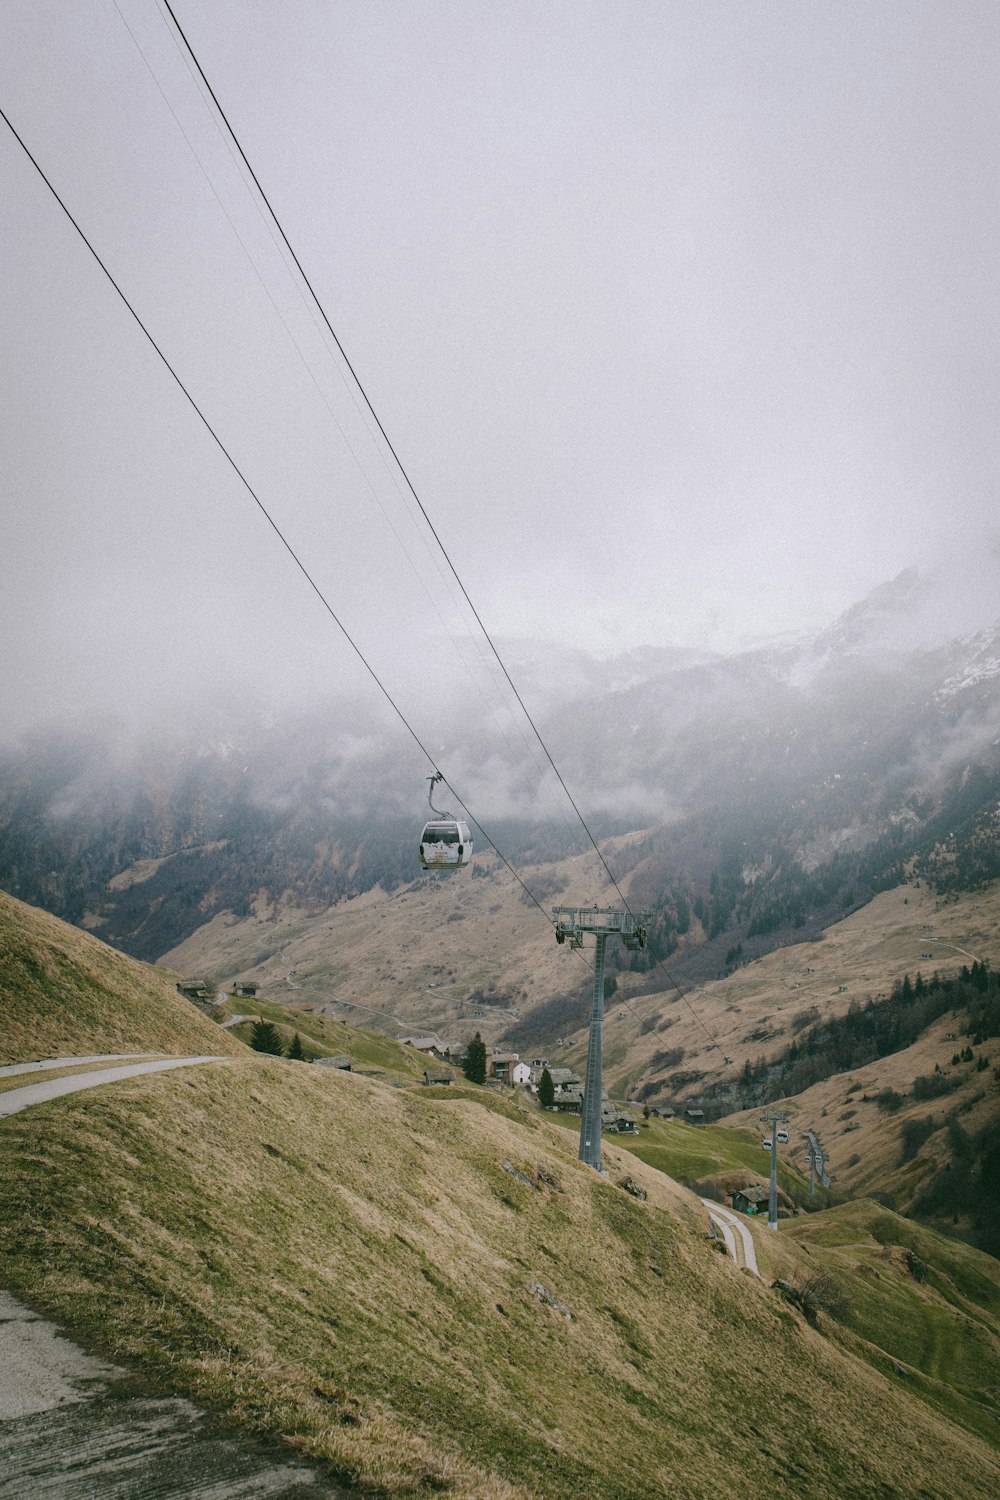 a ski lift going up a hill on a cloudy day